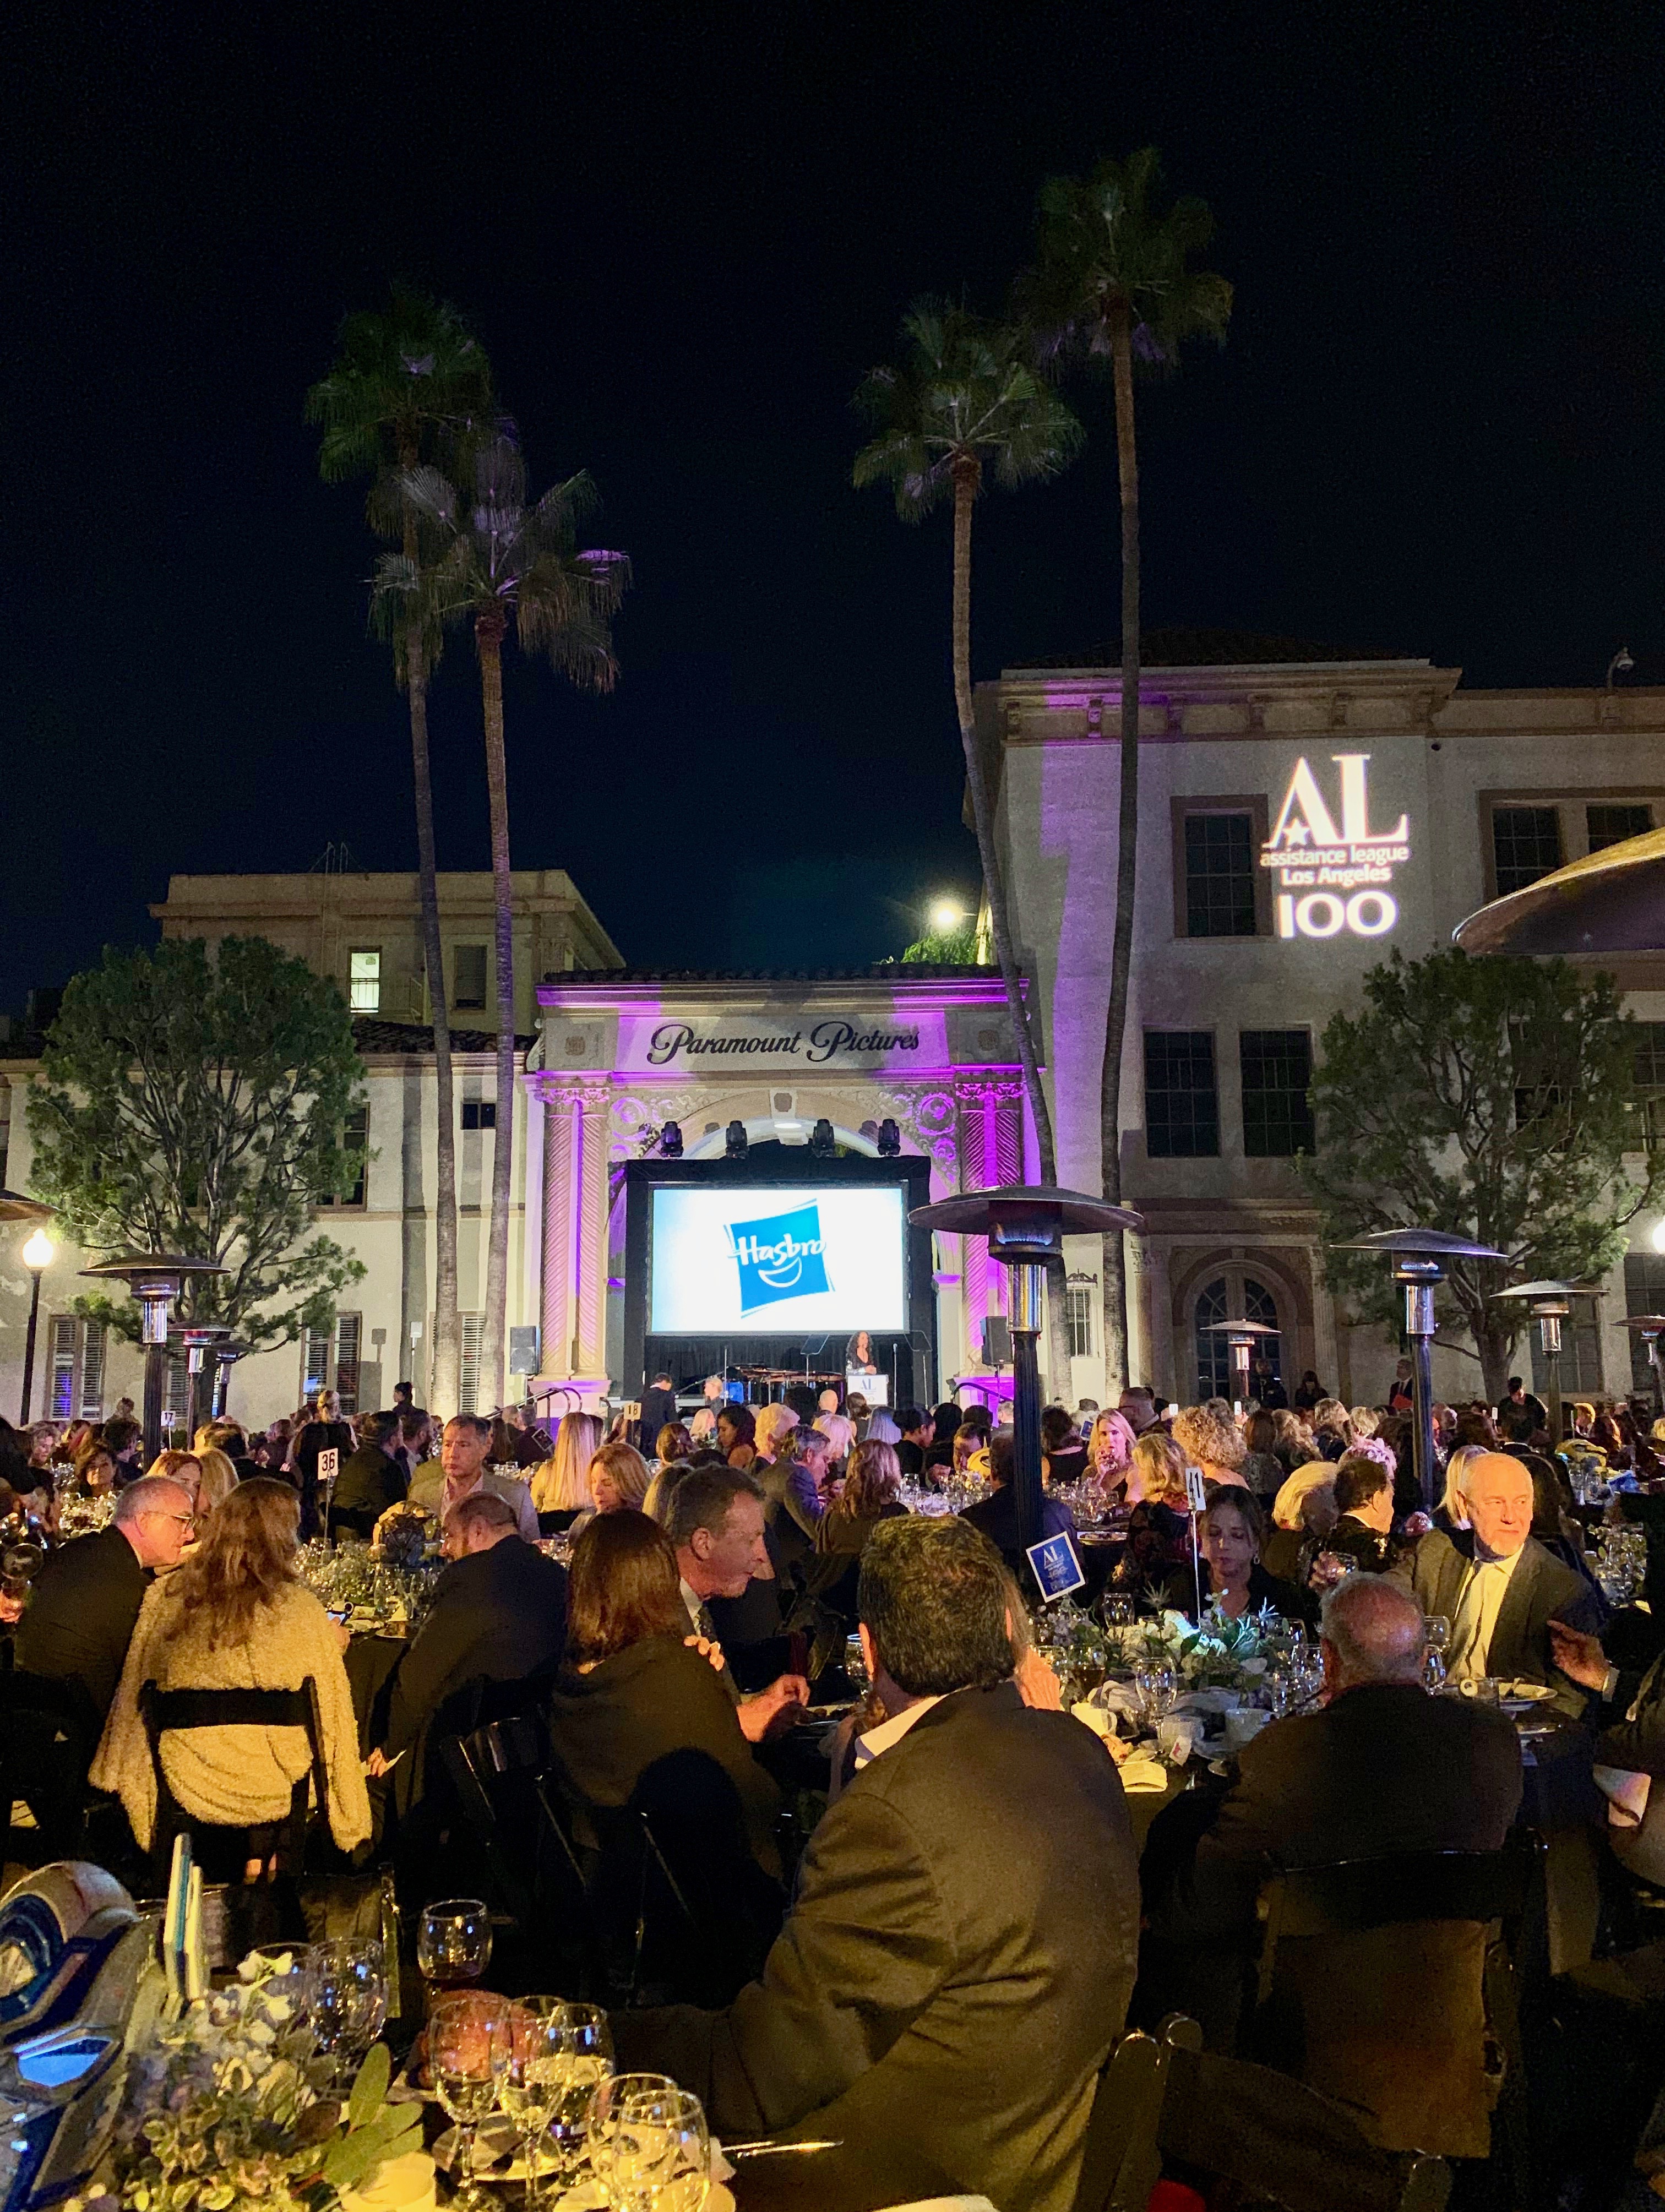 Guests at Paramount Pictures Celebrating 100 Years of Assistance League of Los Angeles - Photo: Bryan Watkins